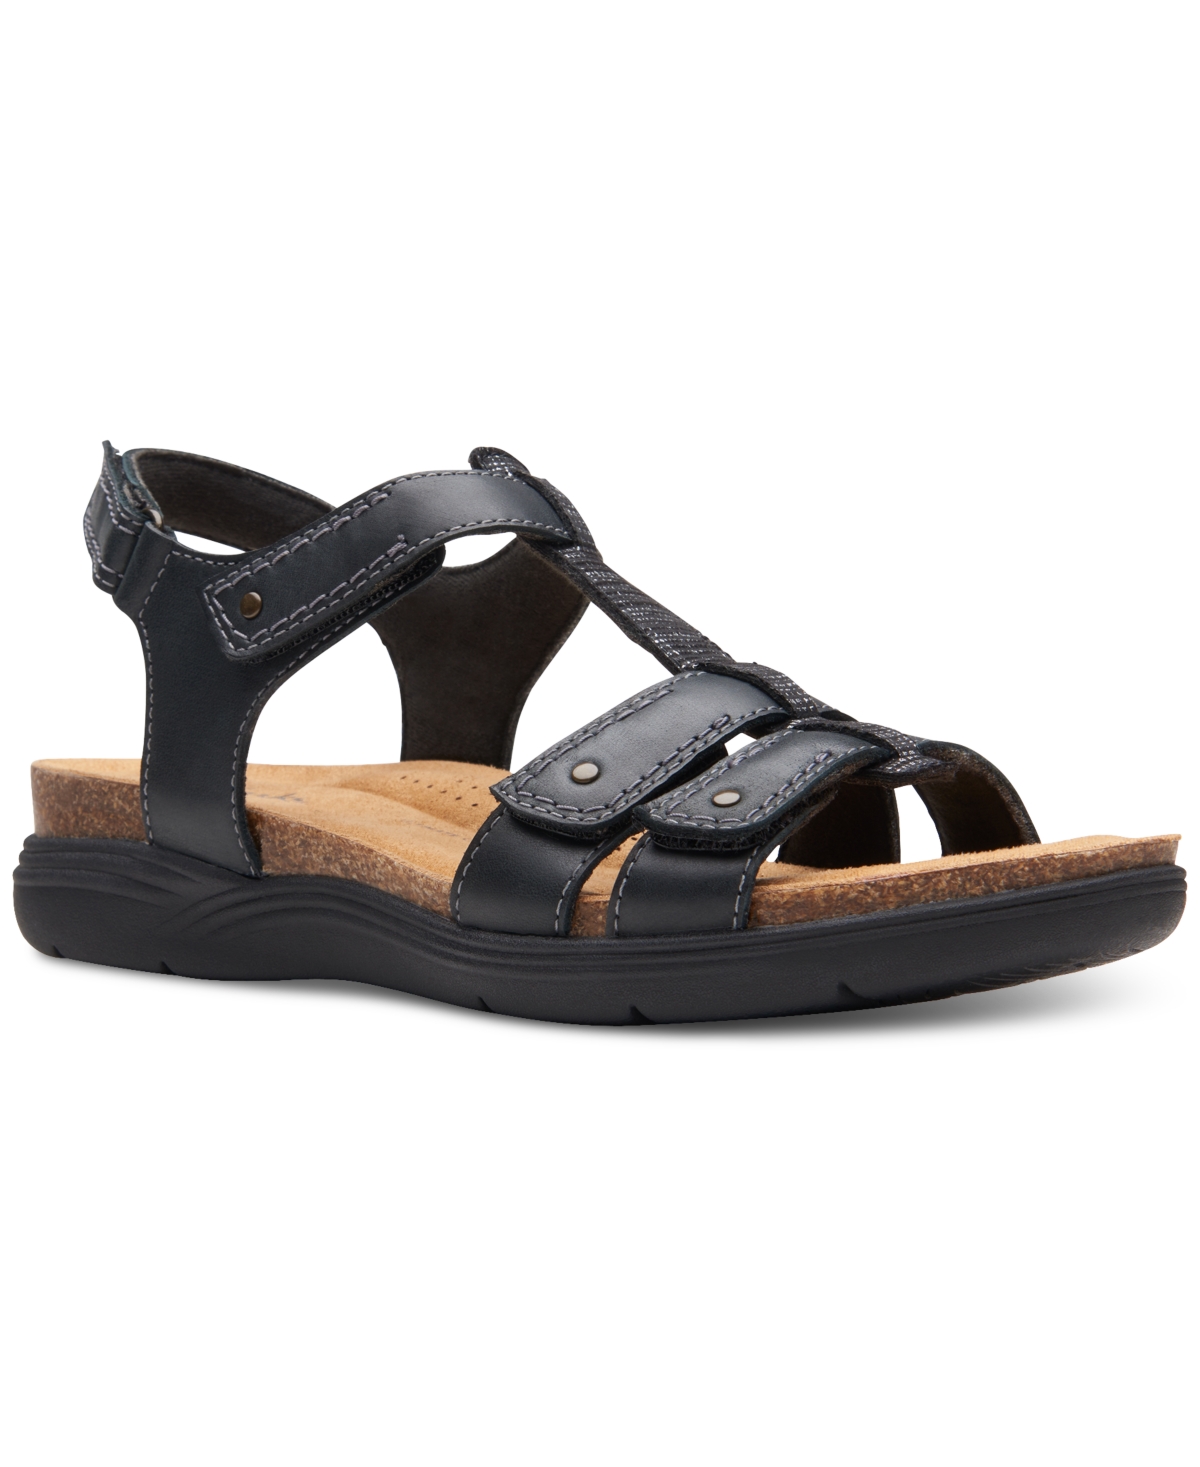 Clarks Women's April Cove Studded Strapped Comfort Sandals In Black Leat